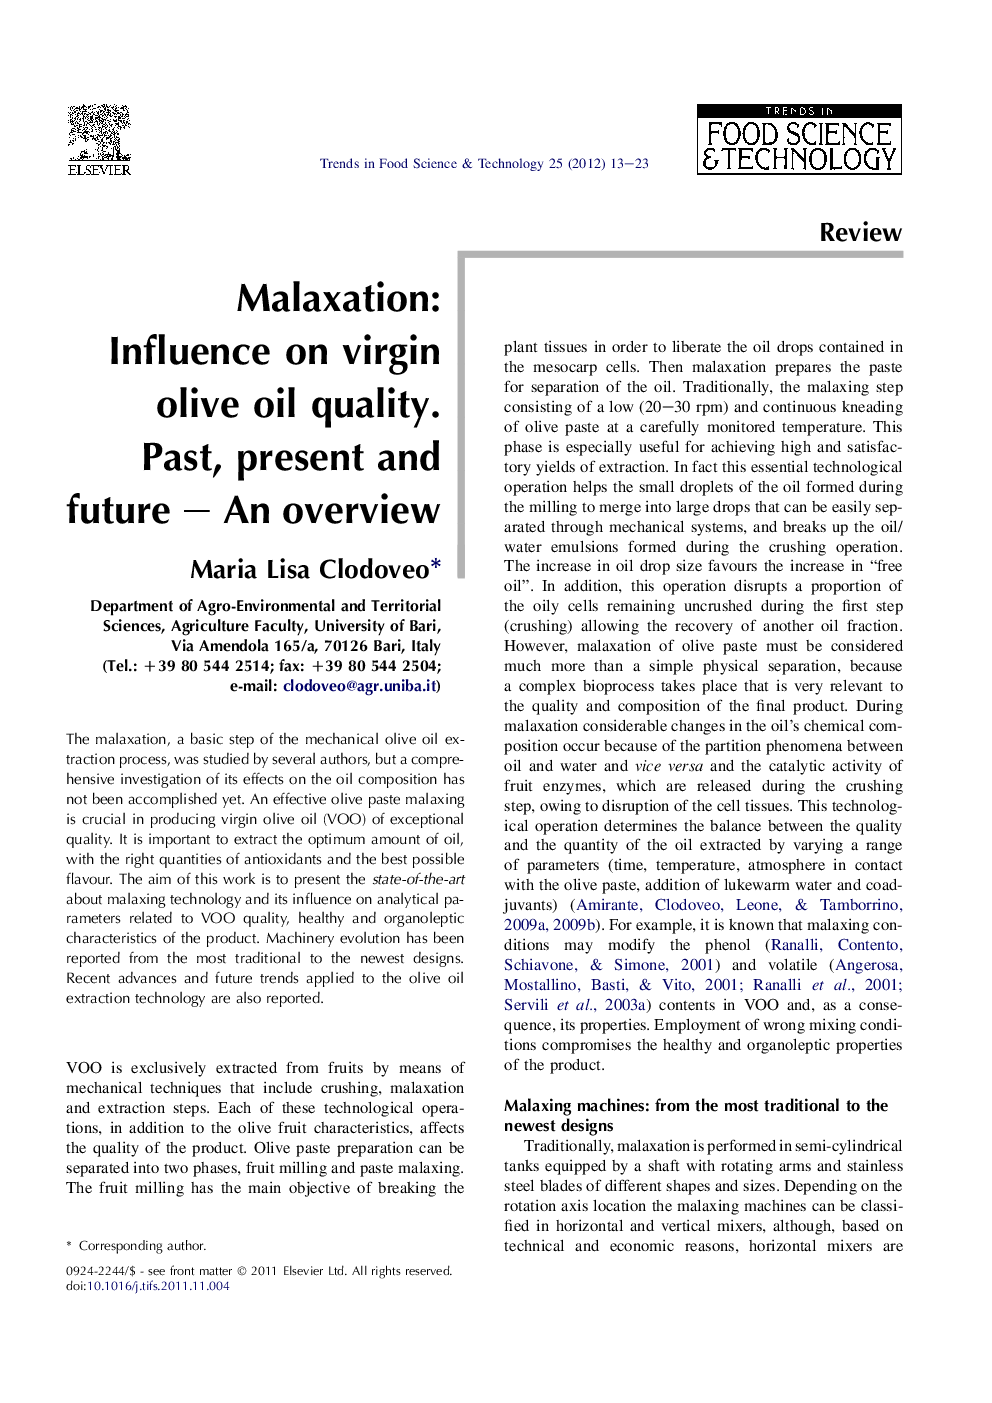 Malaxation: Influence on virgin olive oil quality. Past, present and future – An overview